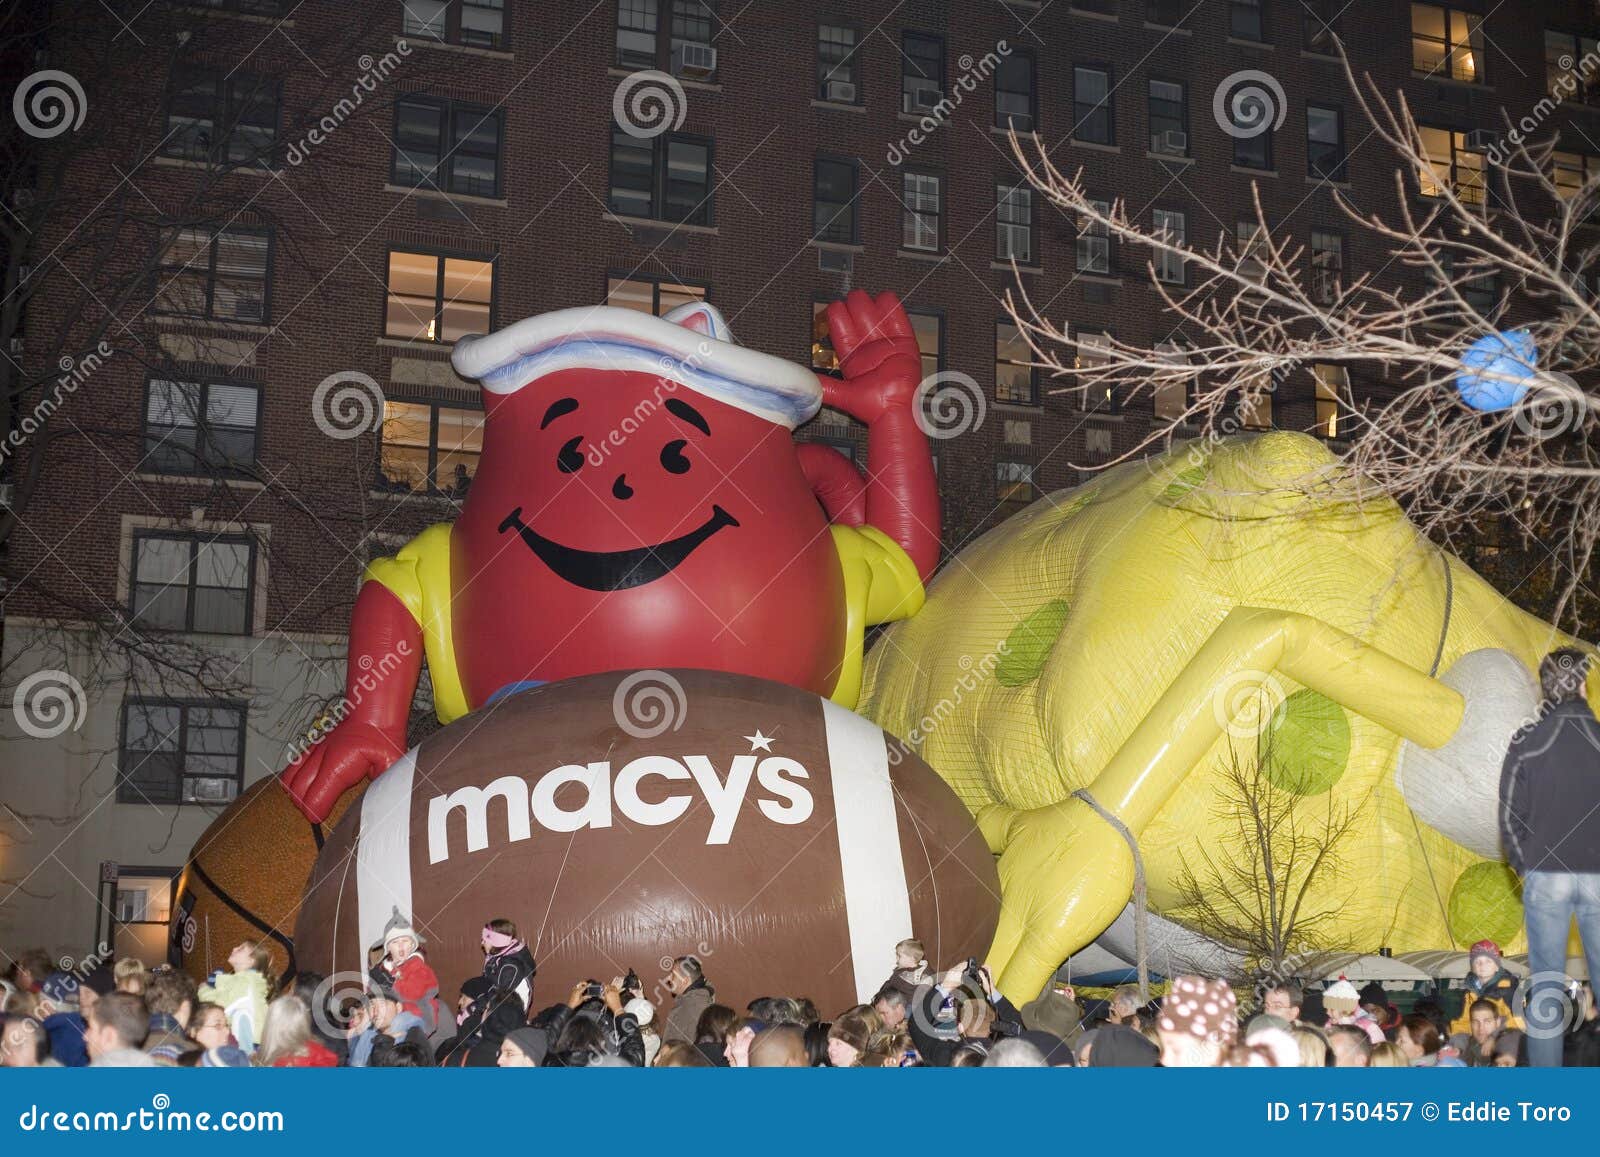 Macy's Balloon Inflation Editorial Photography - Image: 17150457